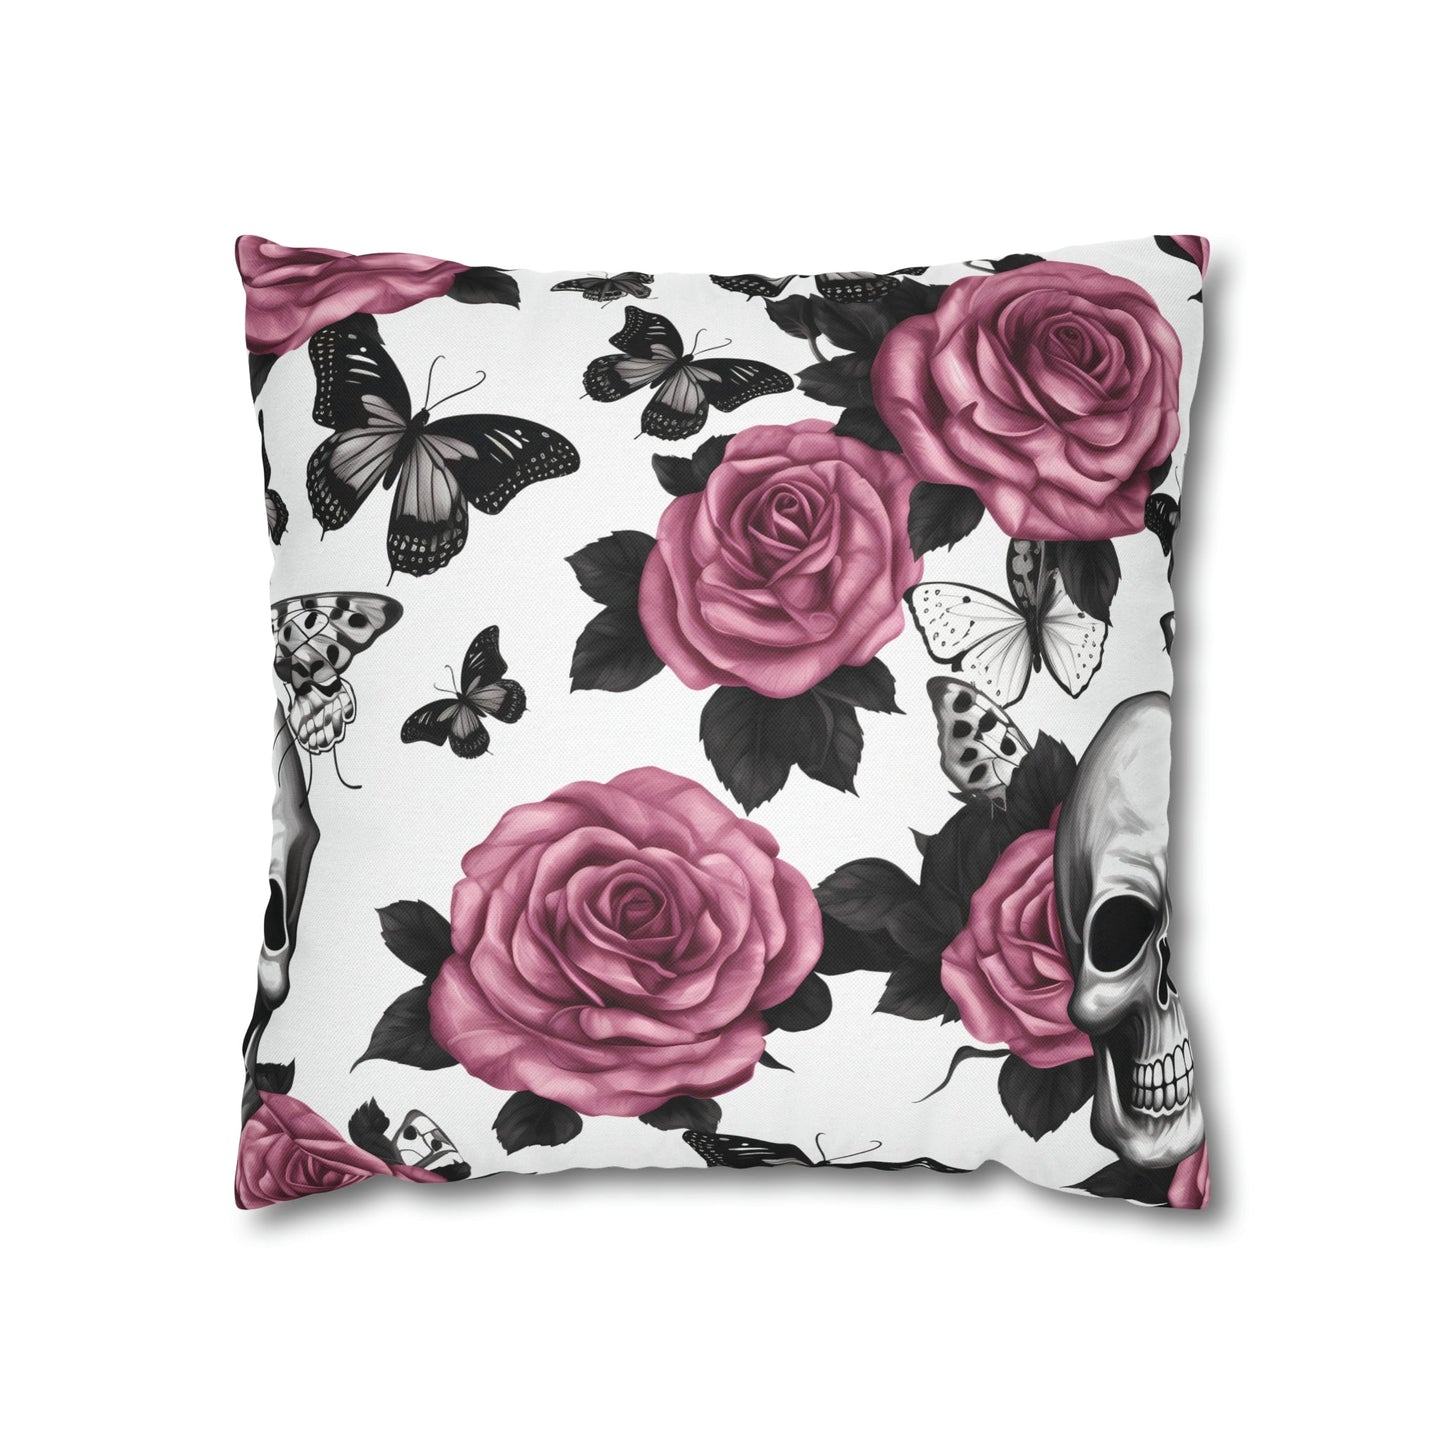 Skulls Pink Roses and Black Butterflies Square Pillow CaseHome DecorVTZdesigns16" × 16"All Over PrintAOPBed